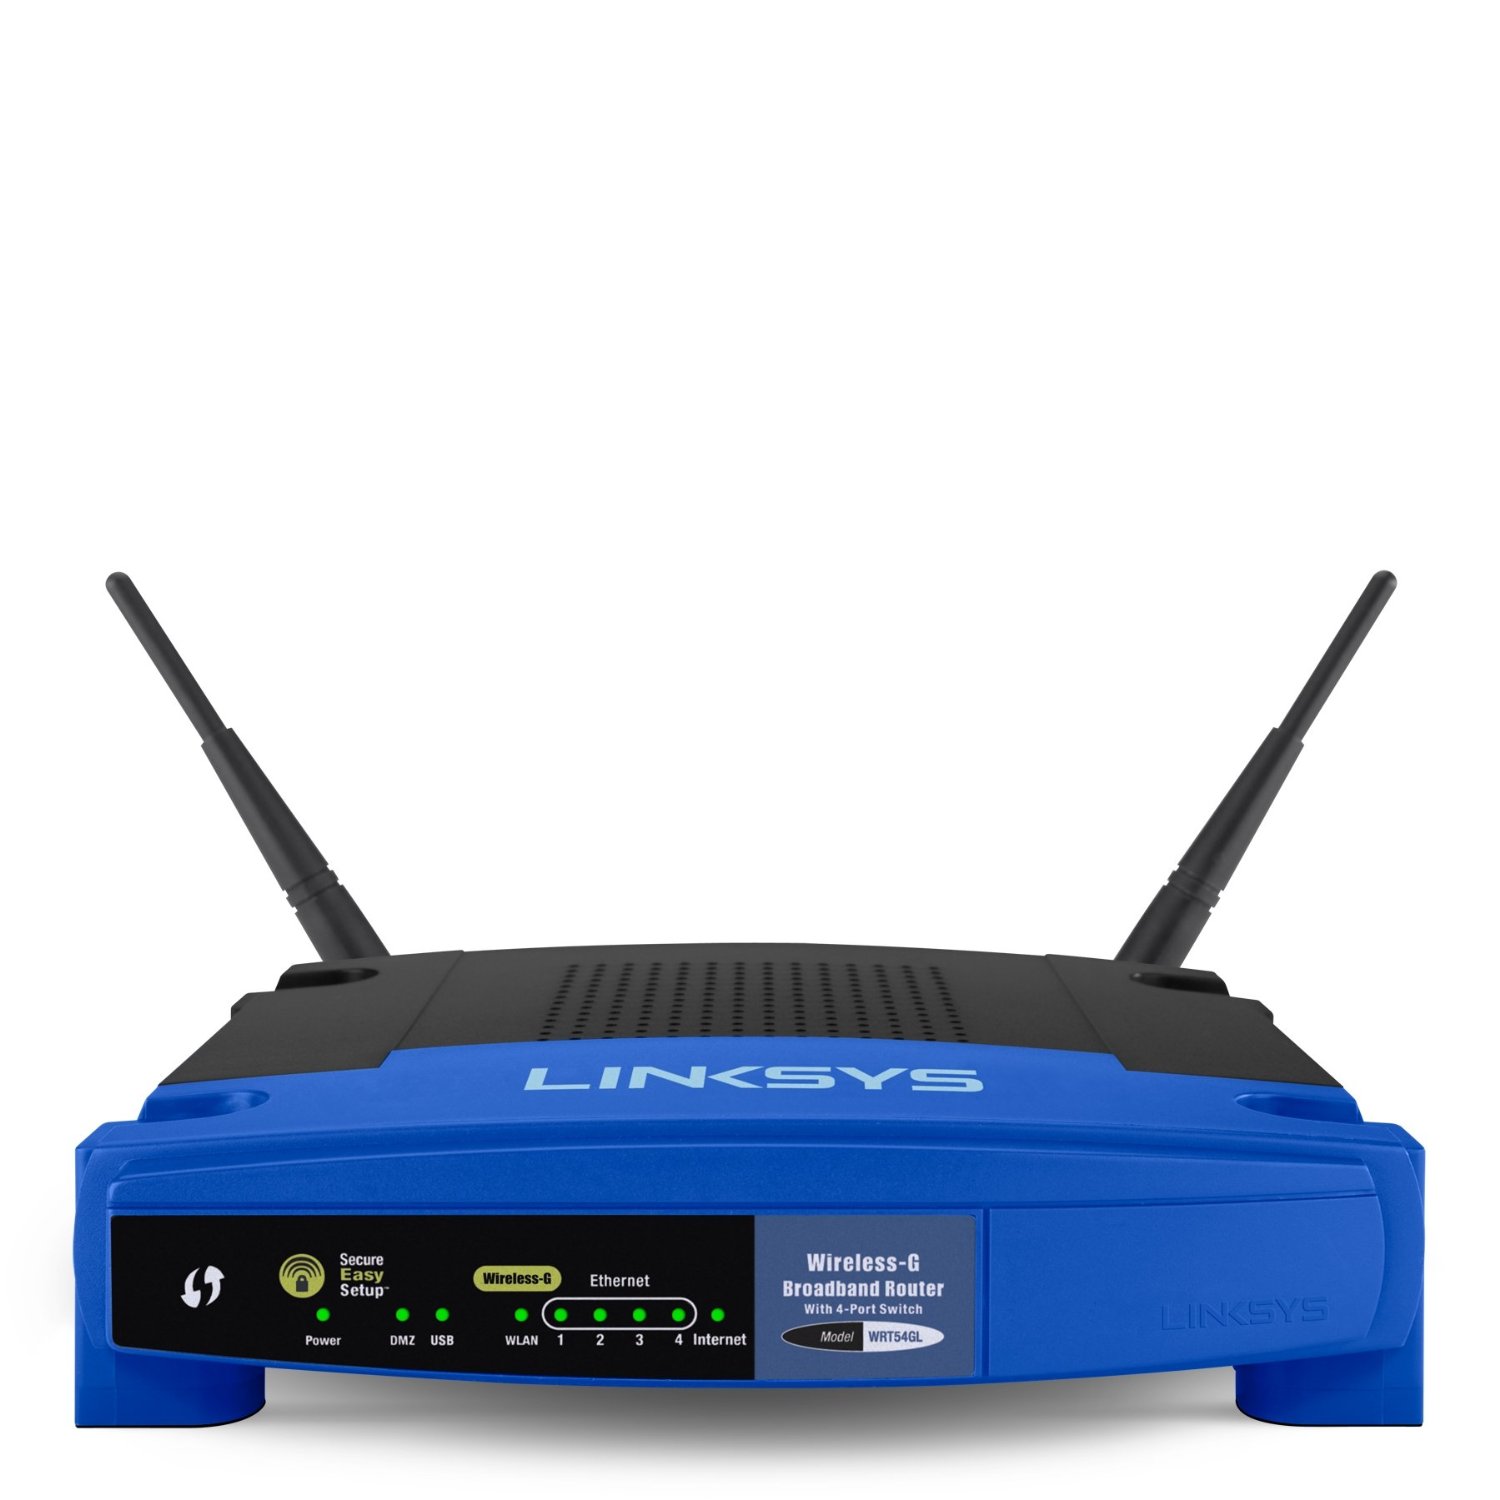 Download Firmware For Linksys Routers